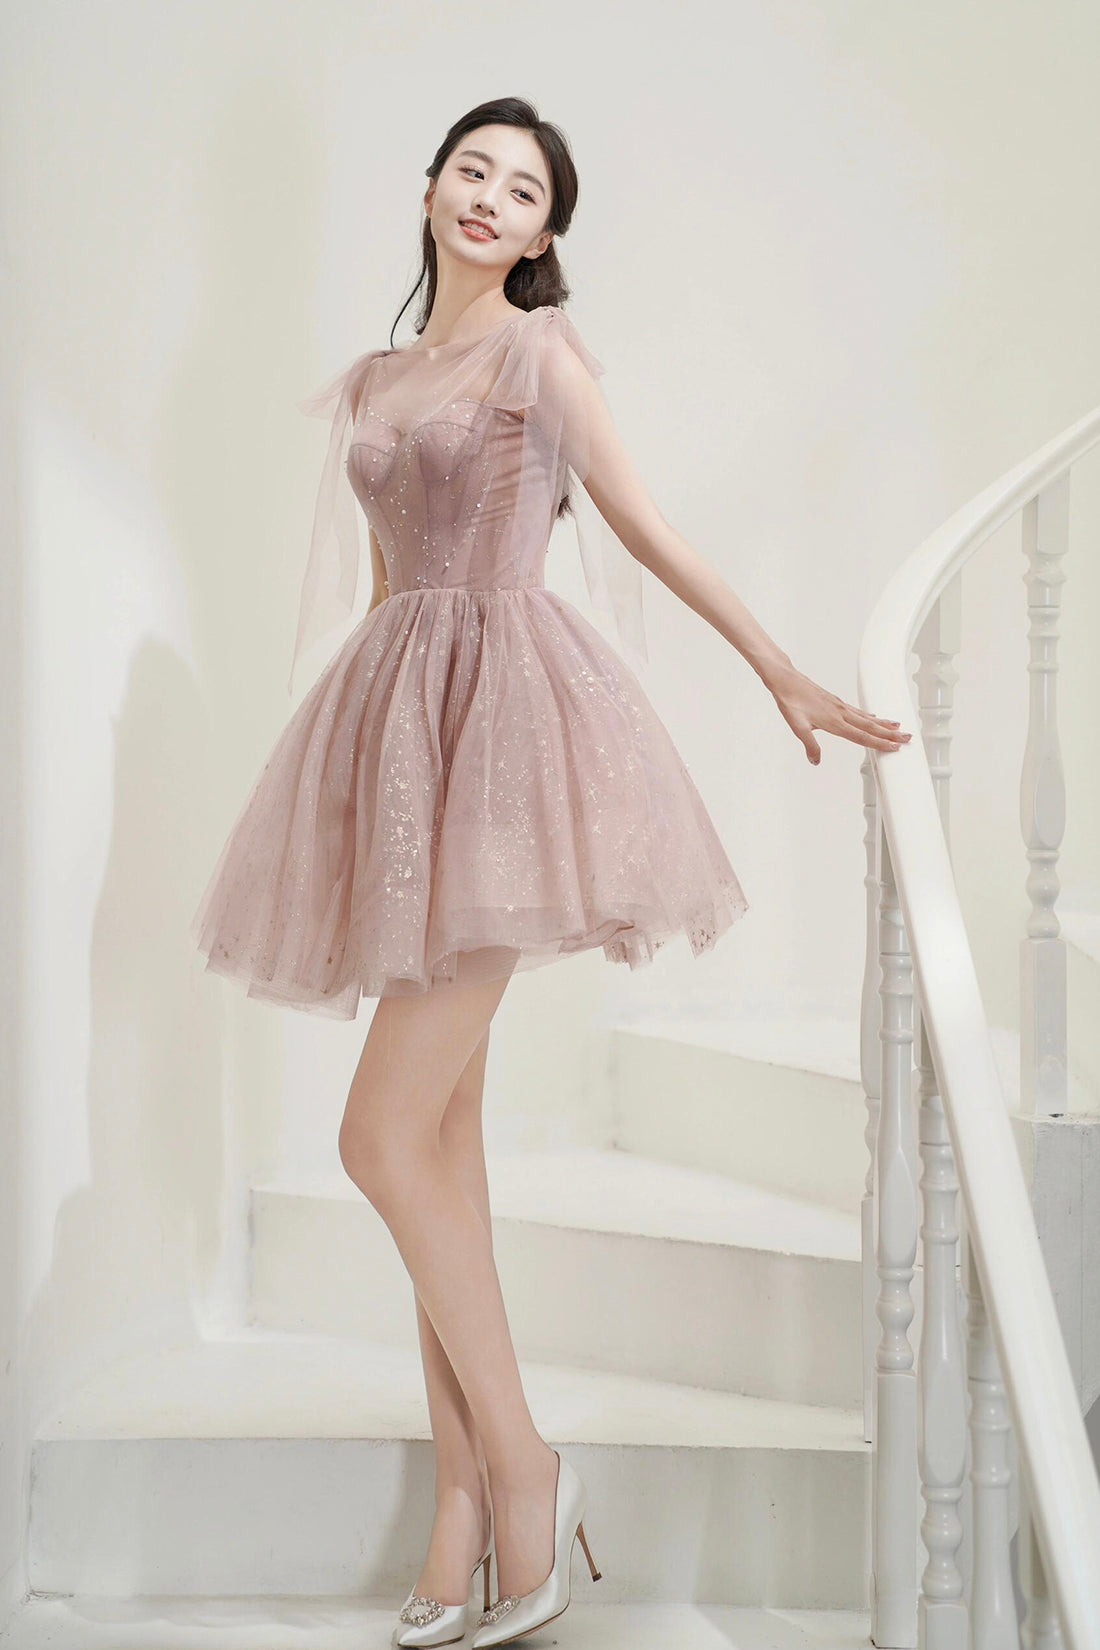 Pink Tulle Knee Length Prom Dress, Cute A-Line Party Dress